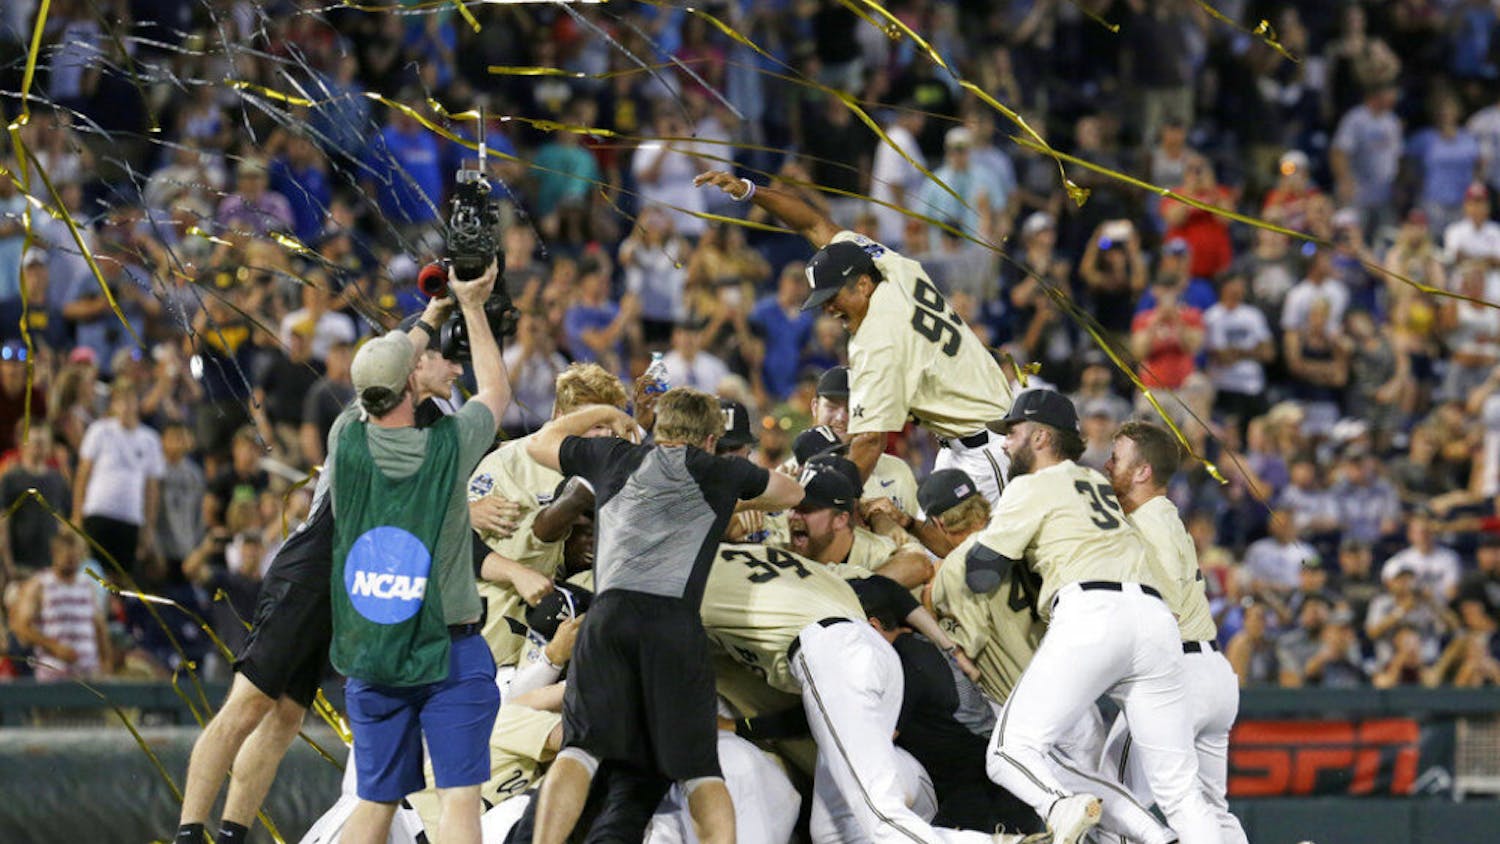 FILE - In this June 26, 2019, file photo, Vanderbilt players celebrate winning Game 3 and the champinship of the NCAA College World Series baseball finals against Michigan in Omaha, Neb. If not for the coronavirus pandemic, there would have been a World Series championship series Omaha, Nebraska. (AP Photo/Nati Harnik, File)